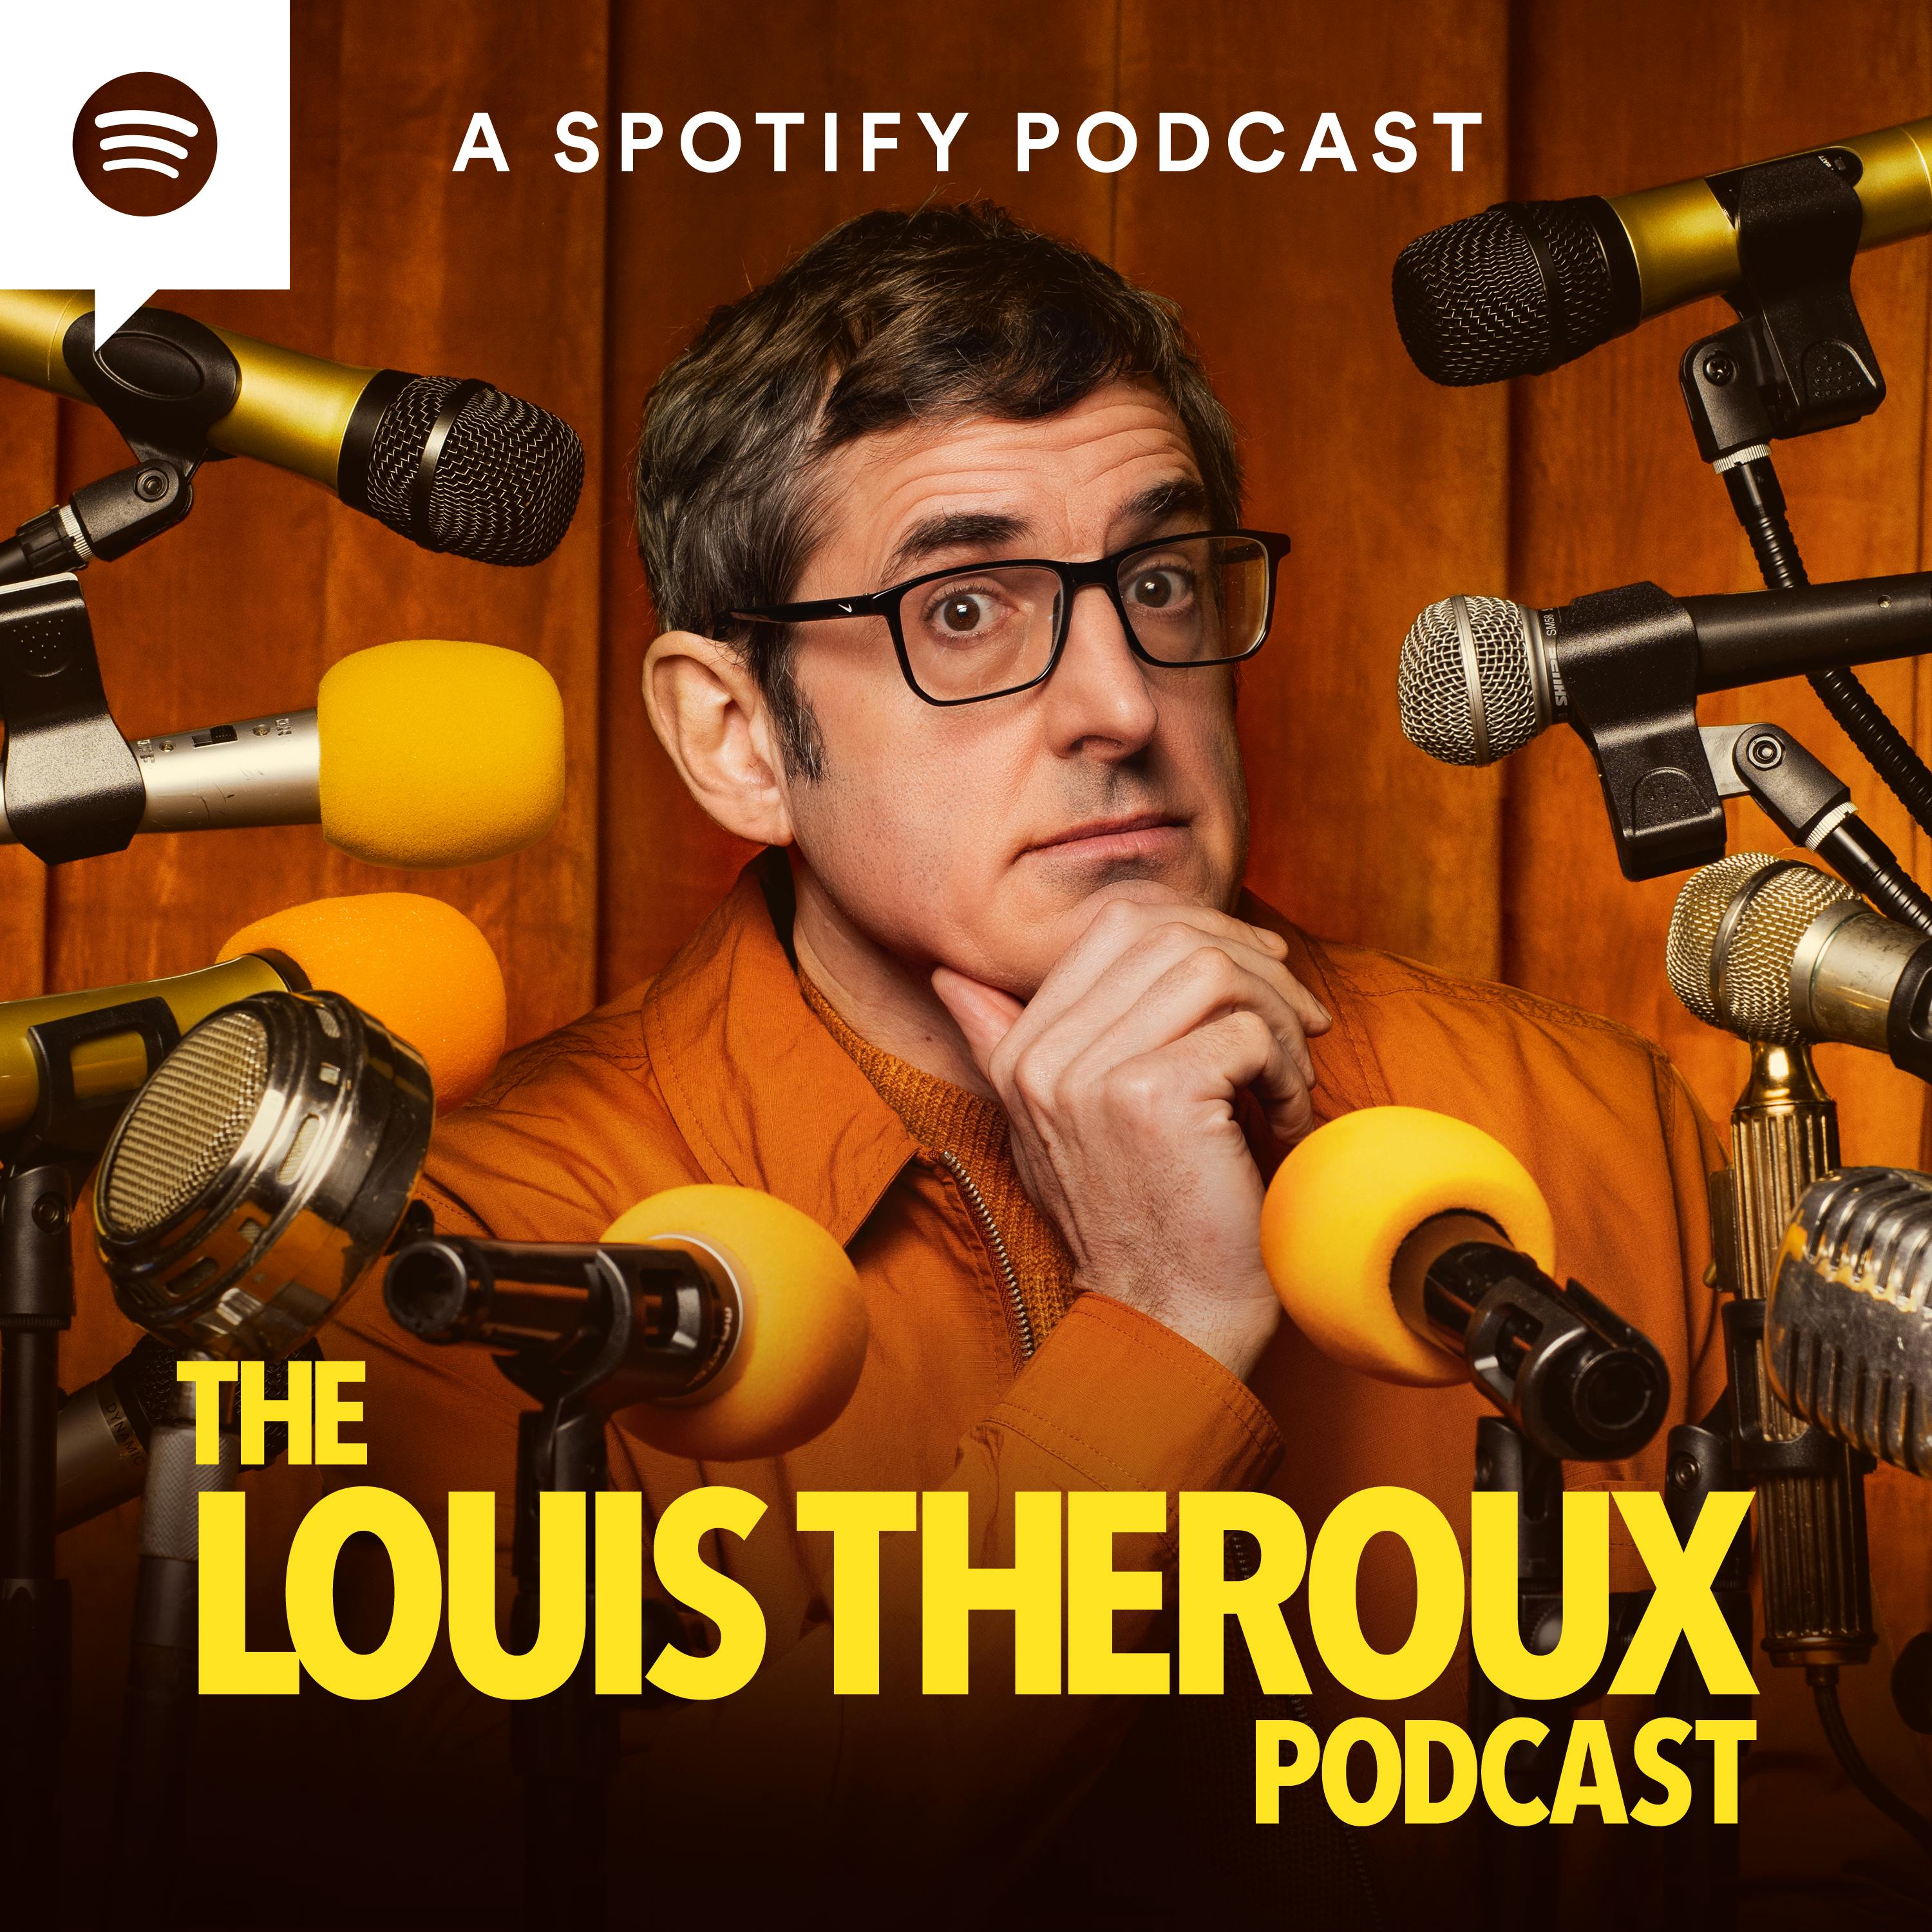 The Louis Theroux Podcast podcast show image